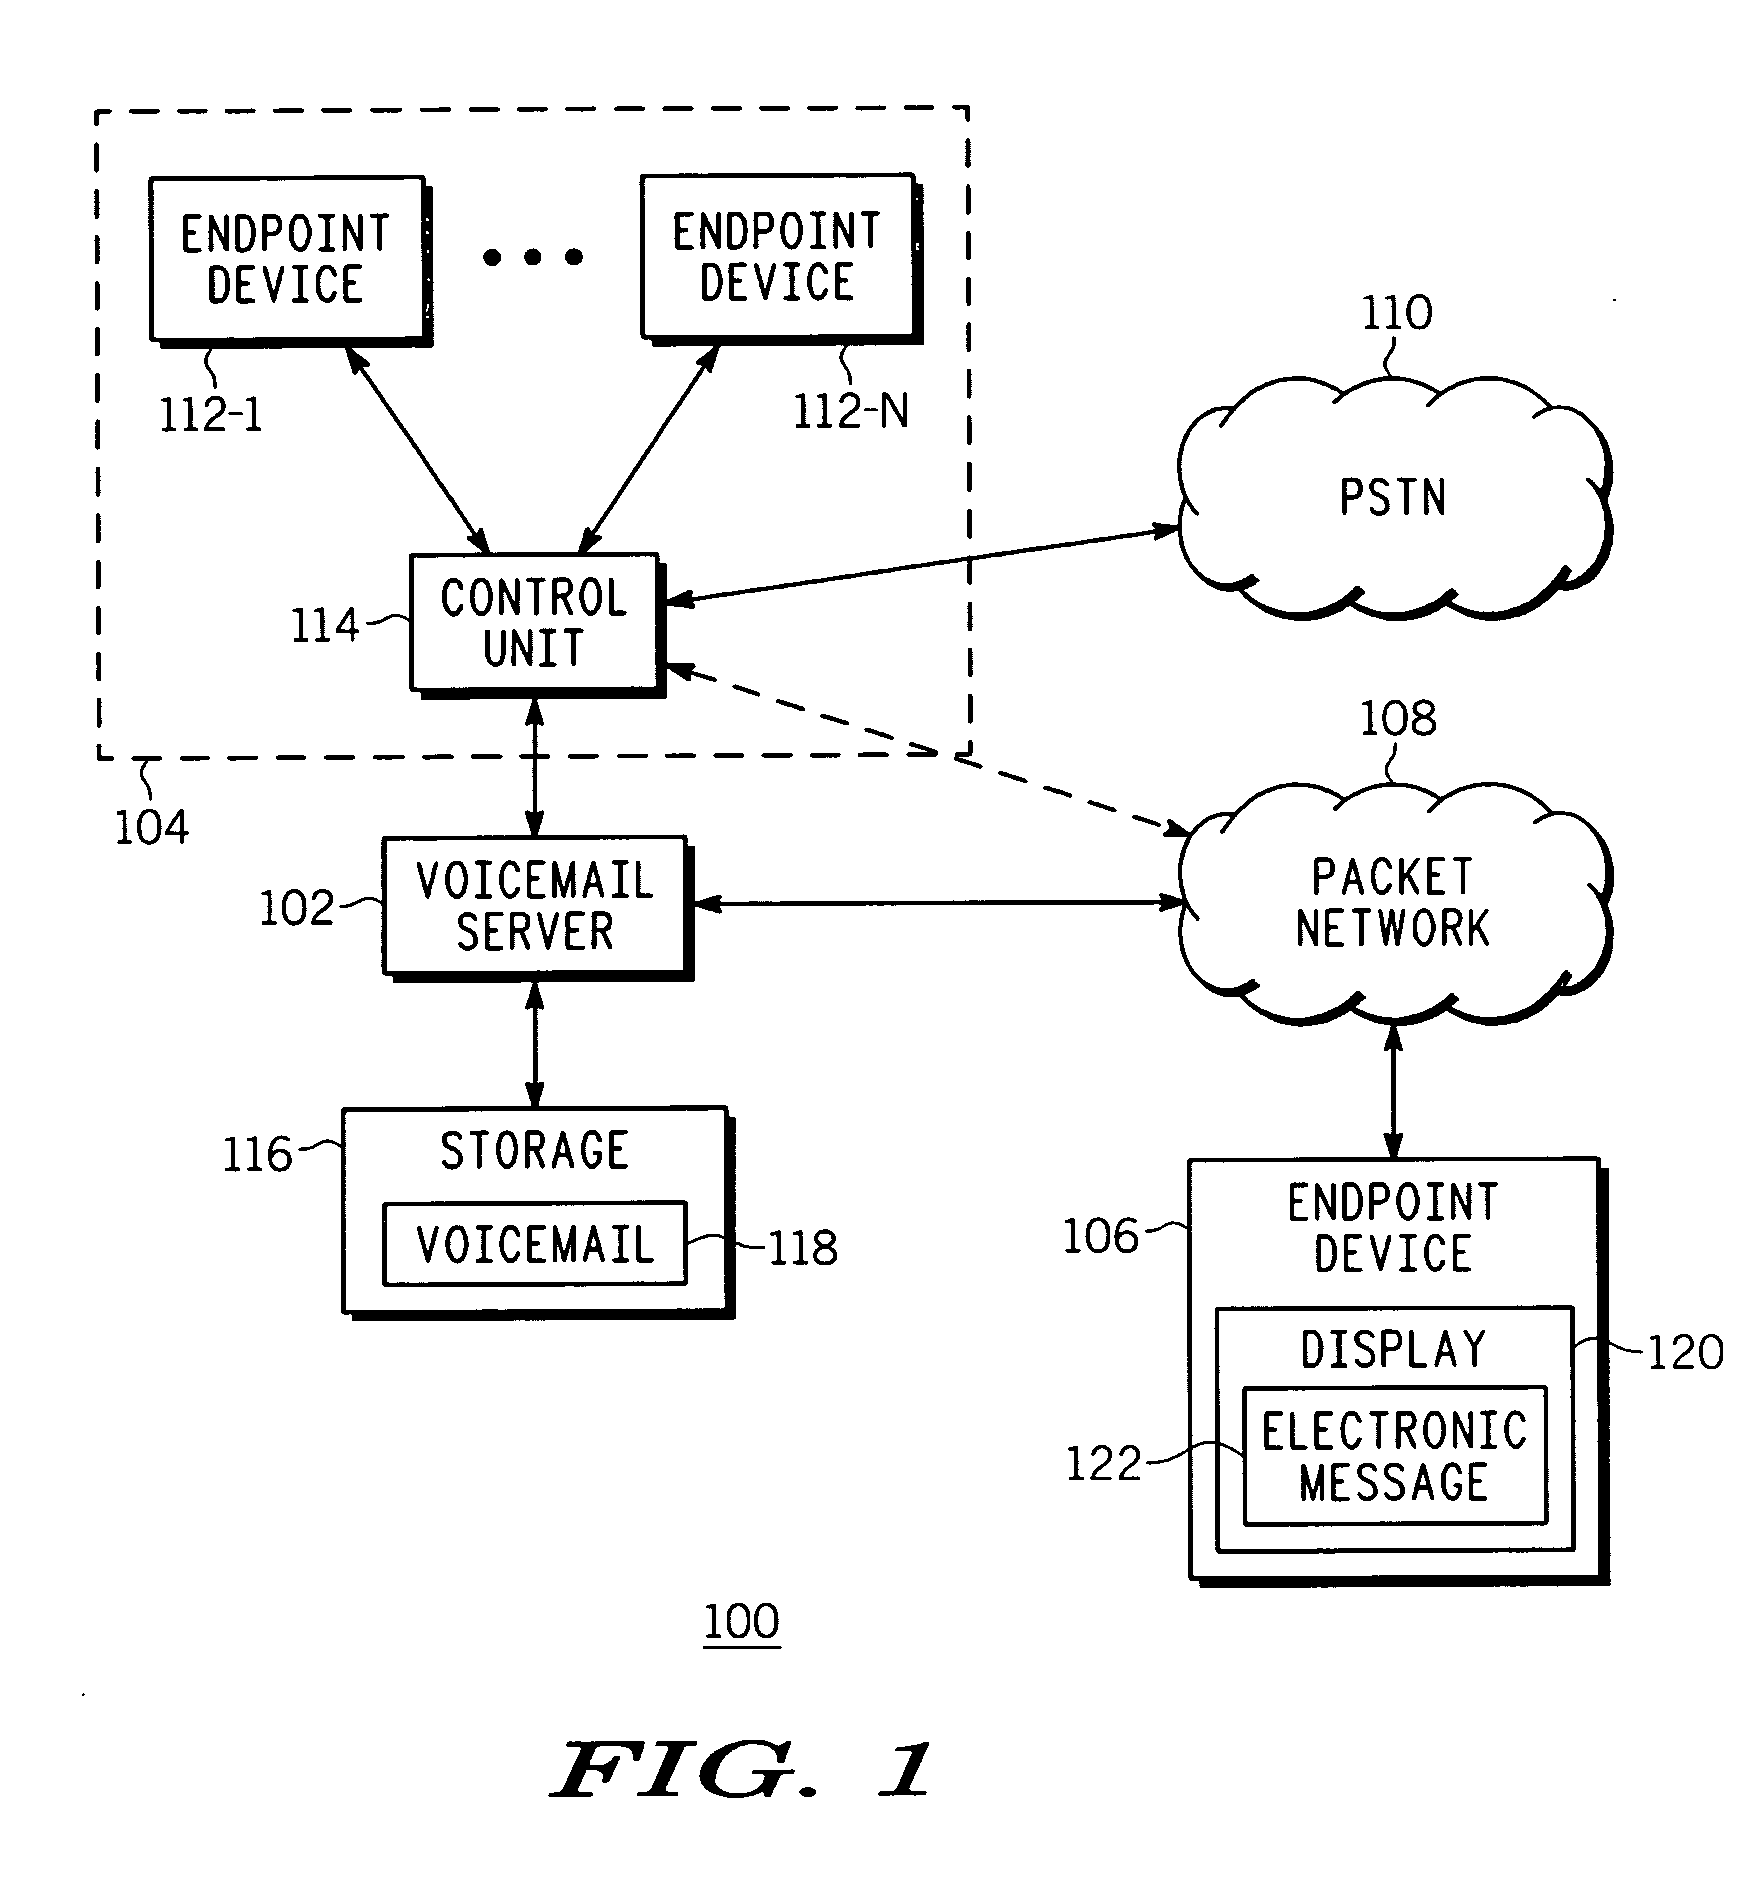 Method and apparatus for bridging between voicemail and electronic message media types in a communication system